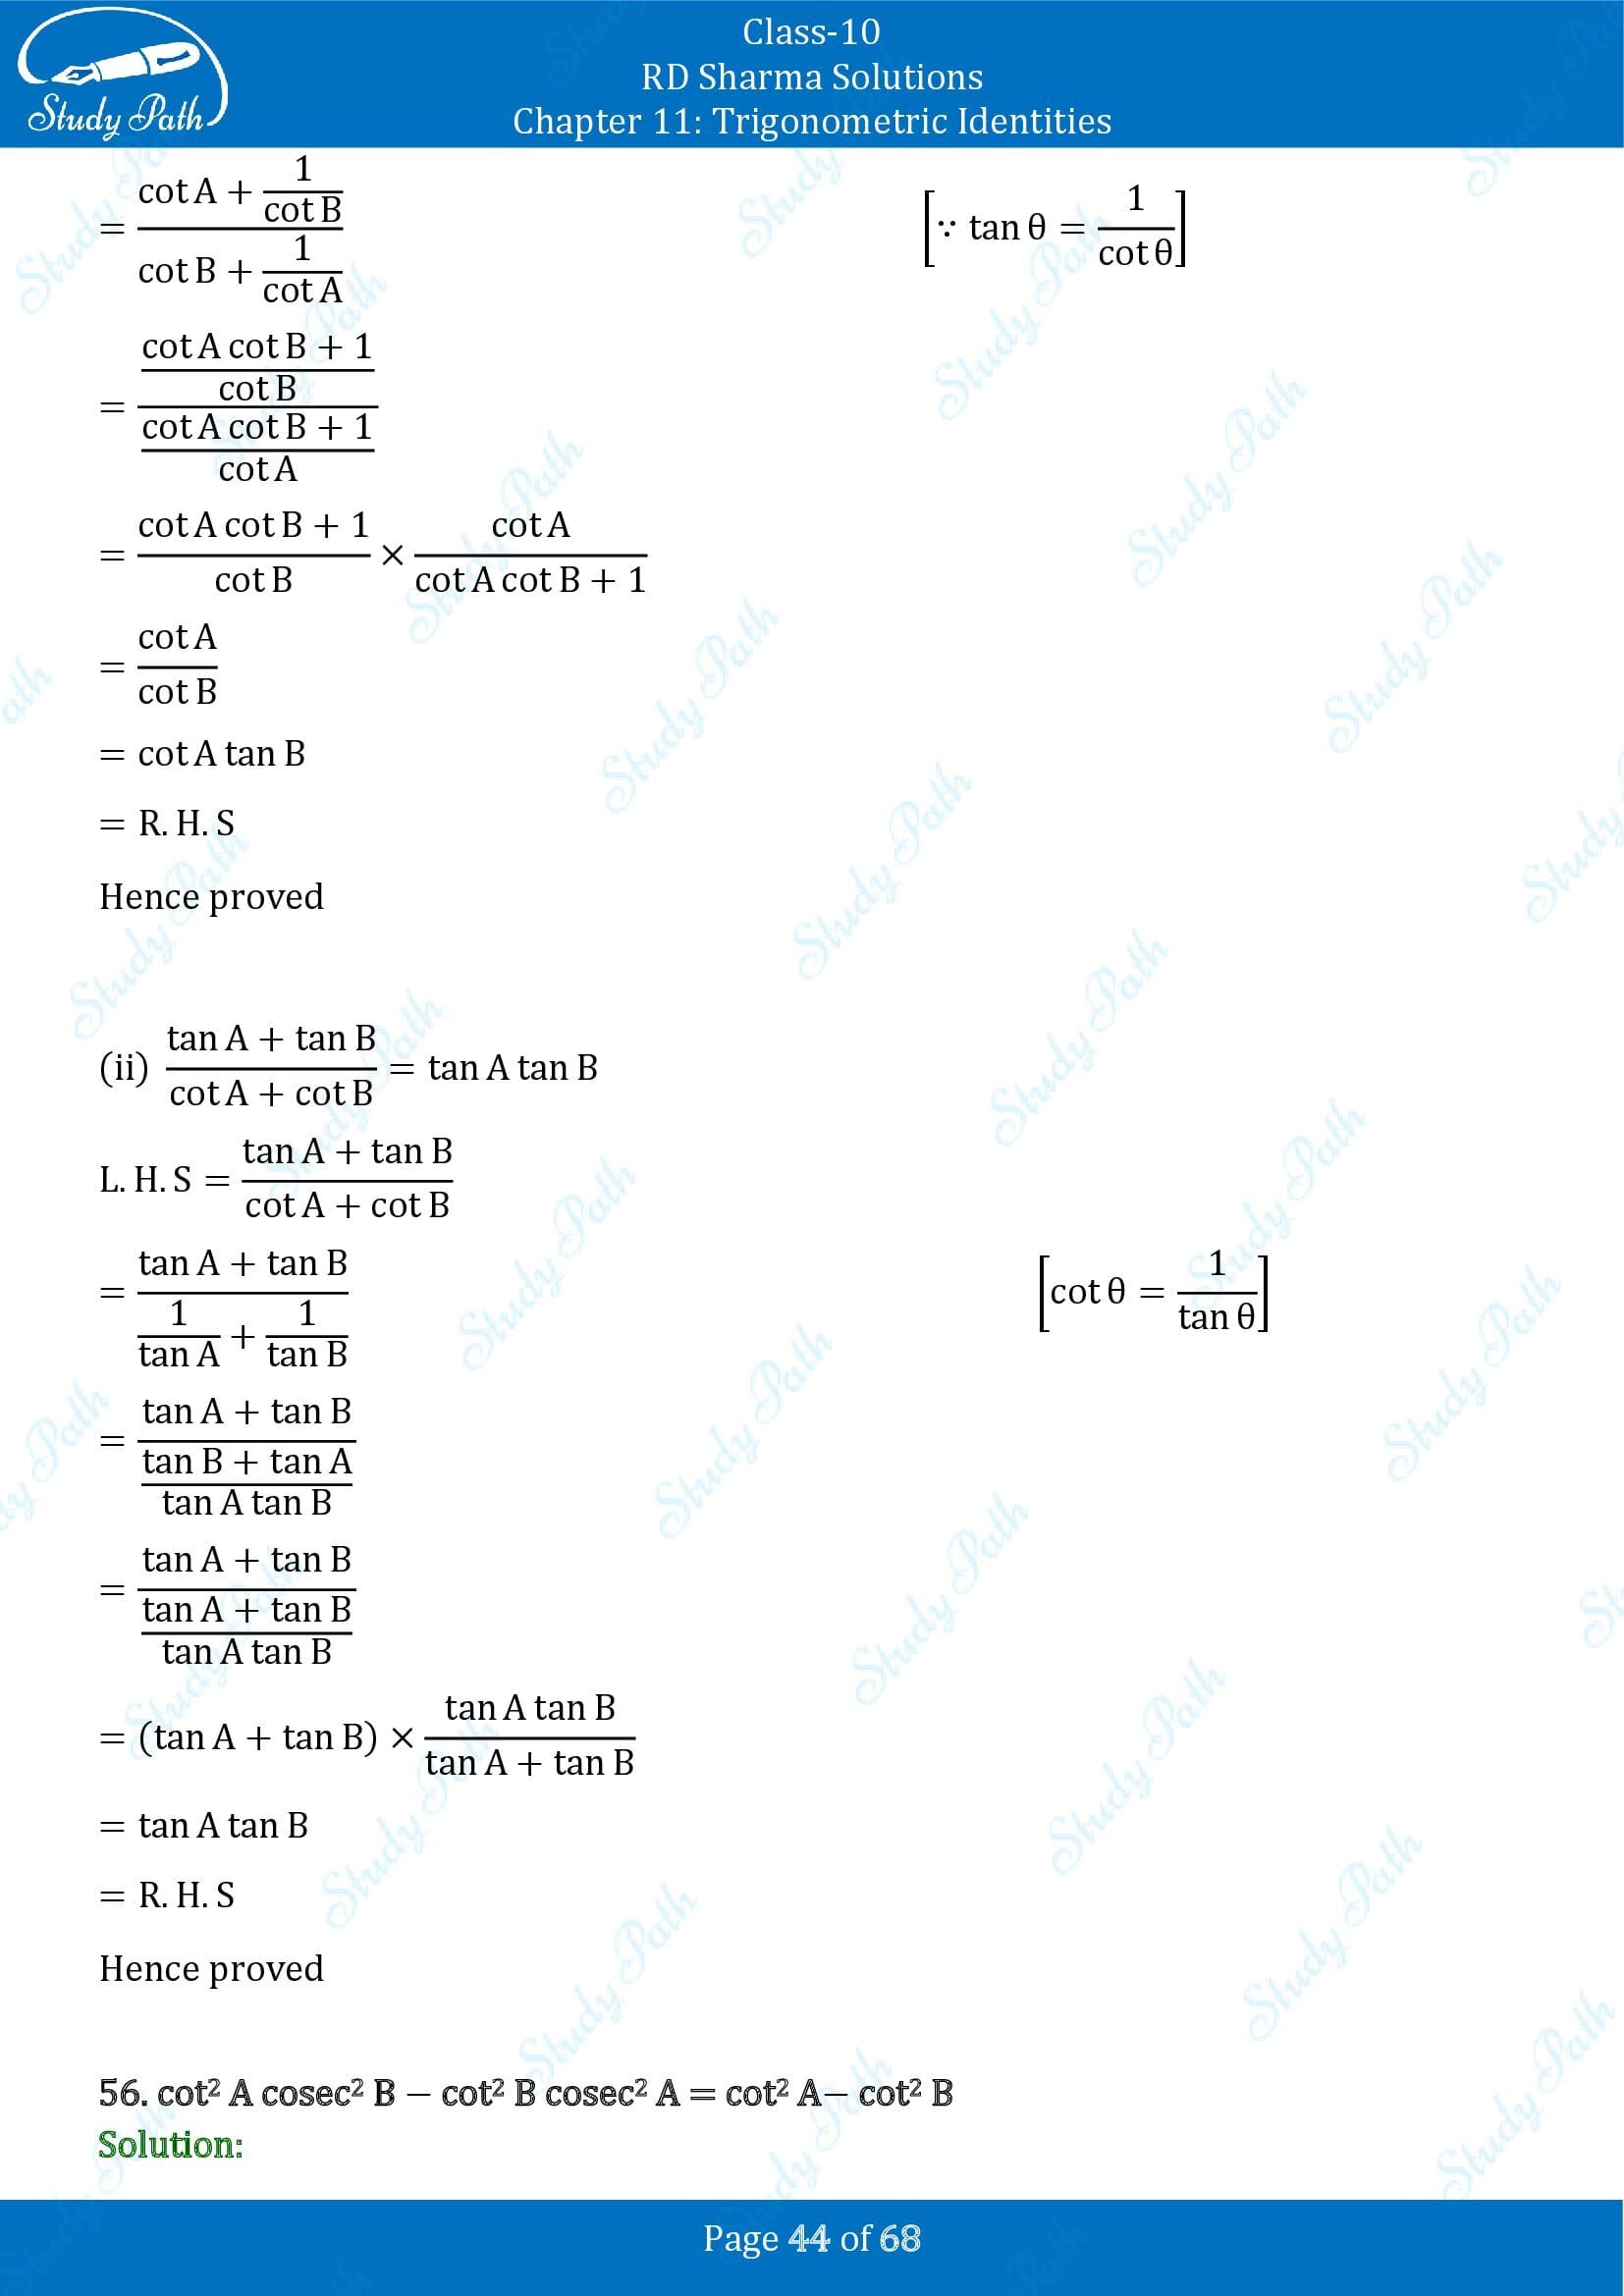 RD Sharma Solutions Class 10 Chapter 11 Trigonometric Identities Exercise 11.1 00044